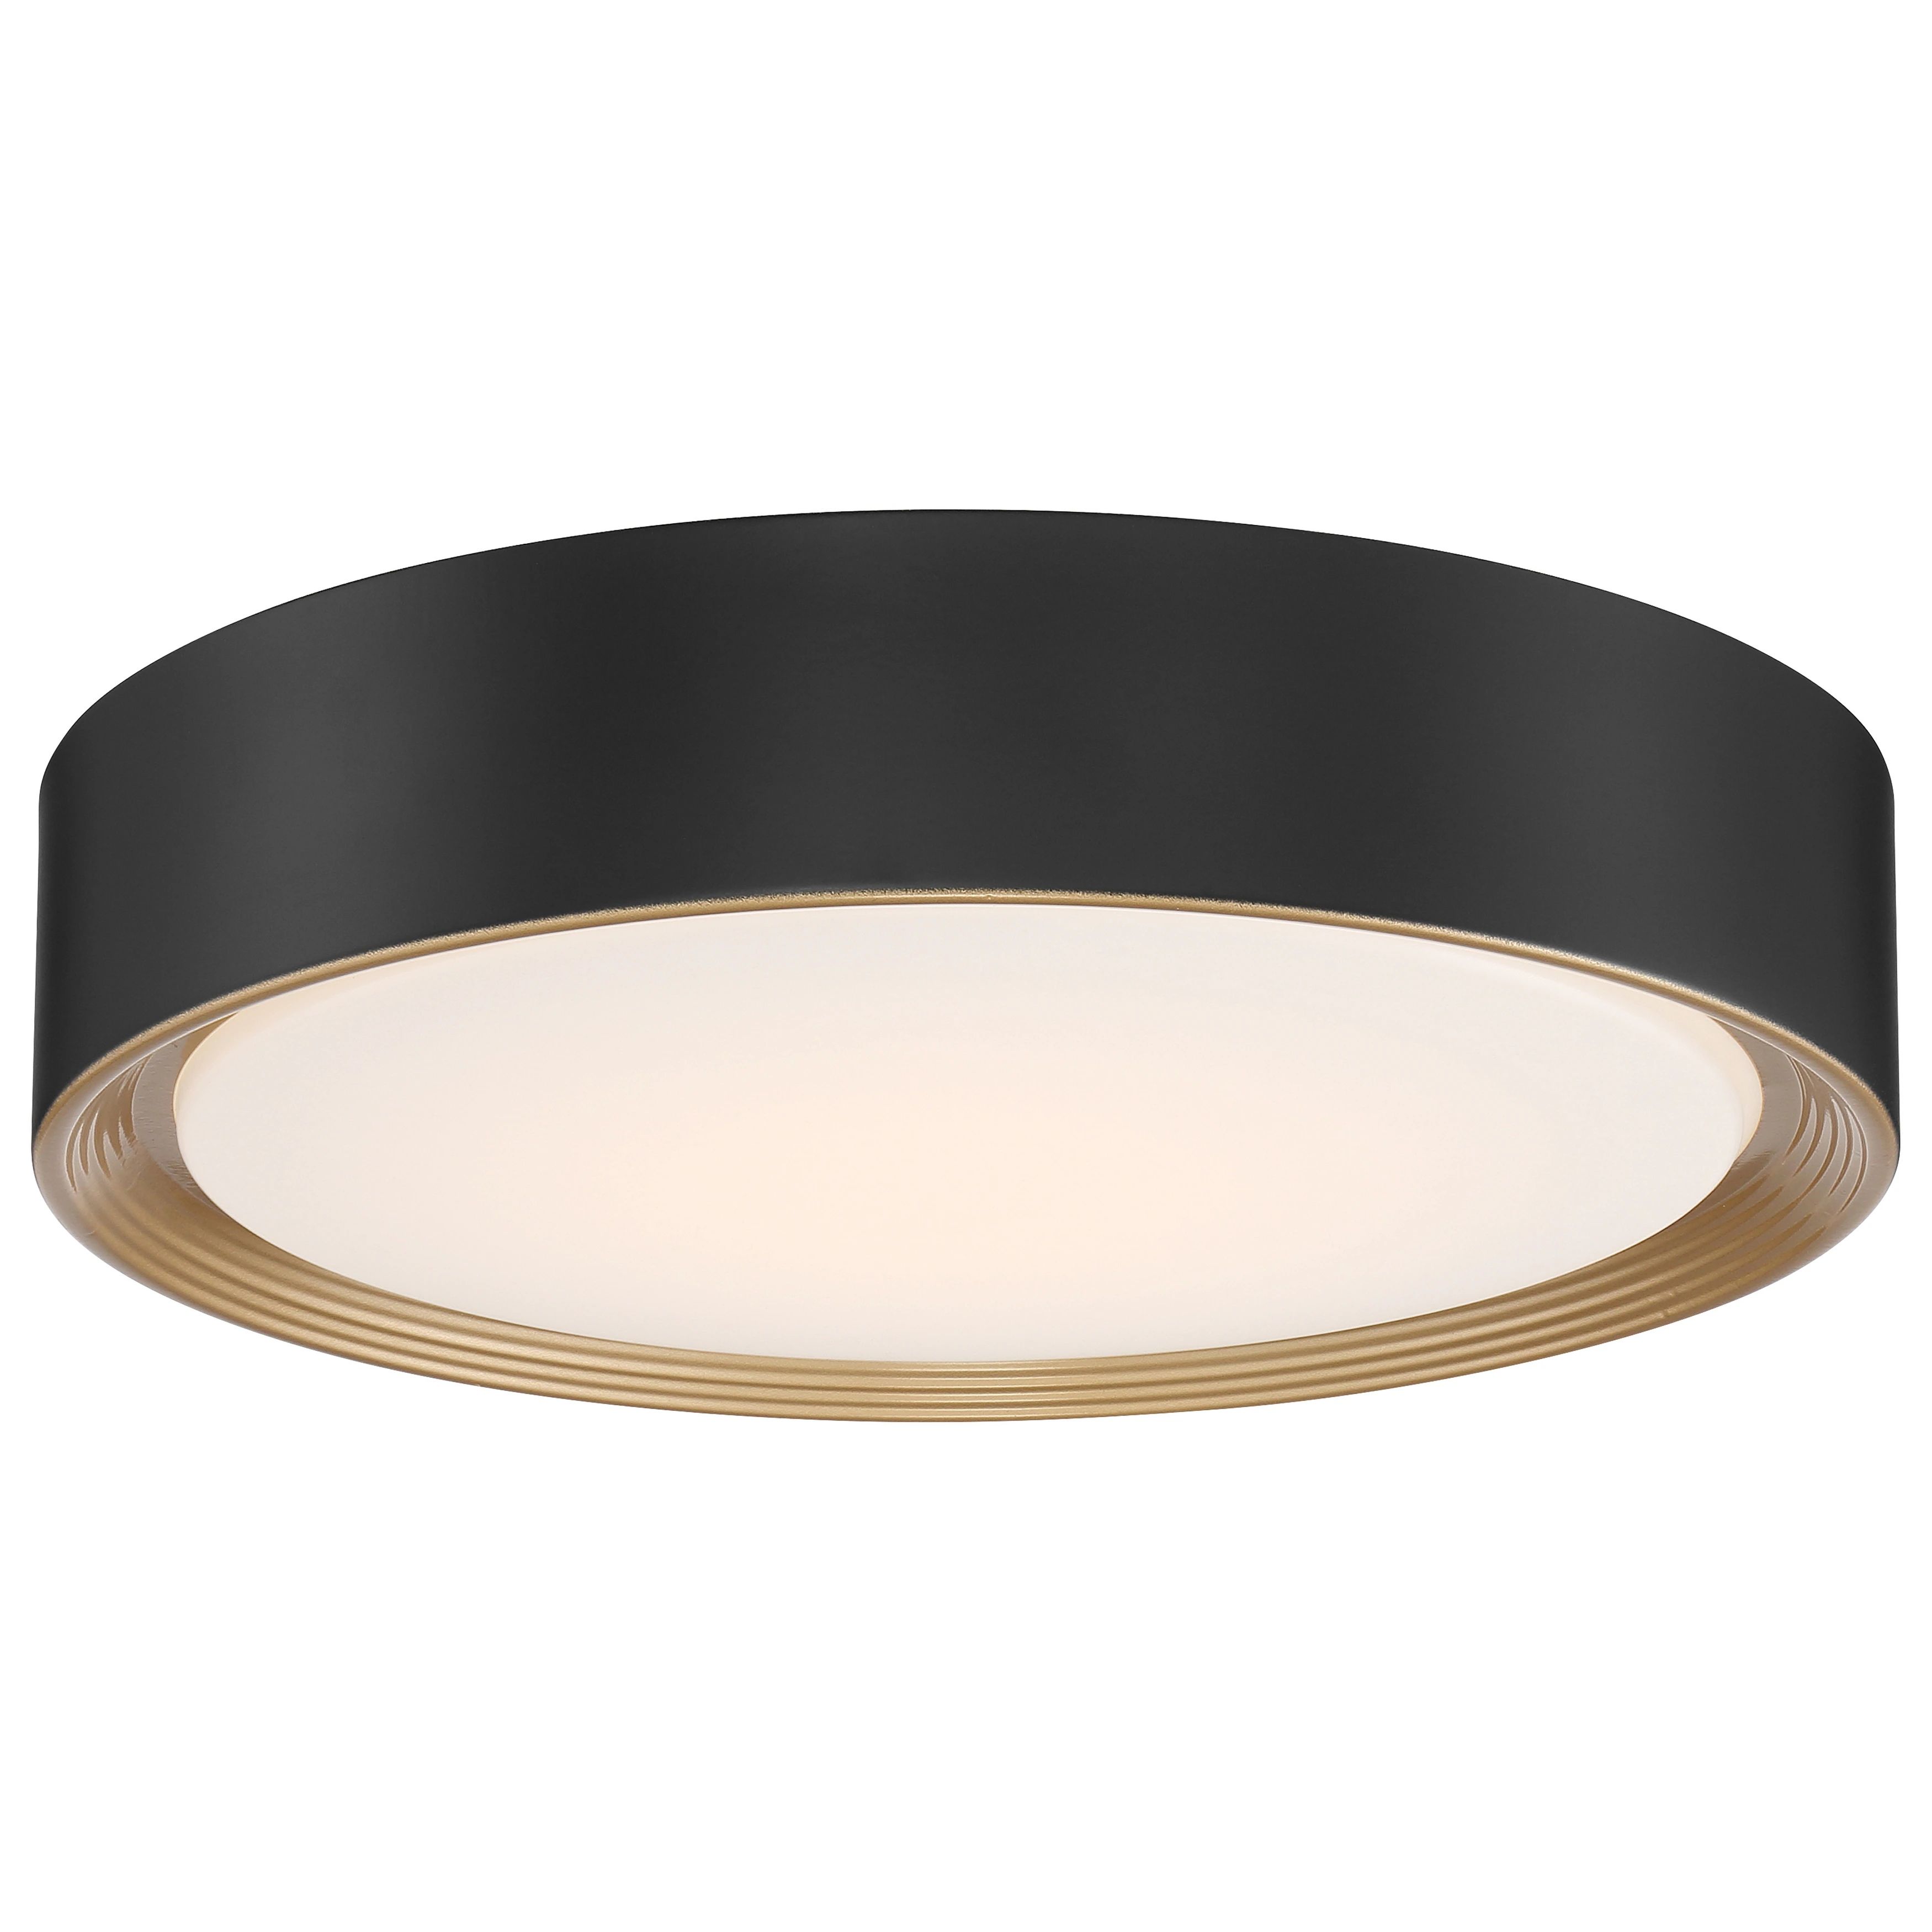 Malaga 16-inch Matte Black LED Flush Mount with Acrylic Lens (As Is Item) | Bed Bath & Beyond